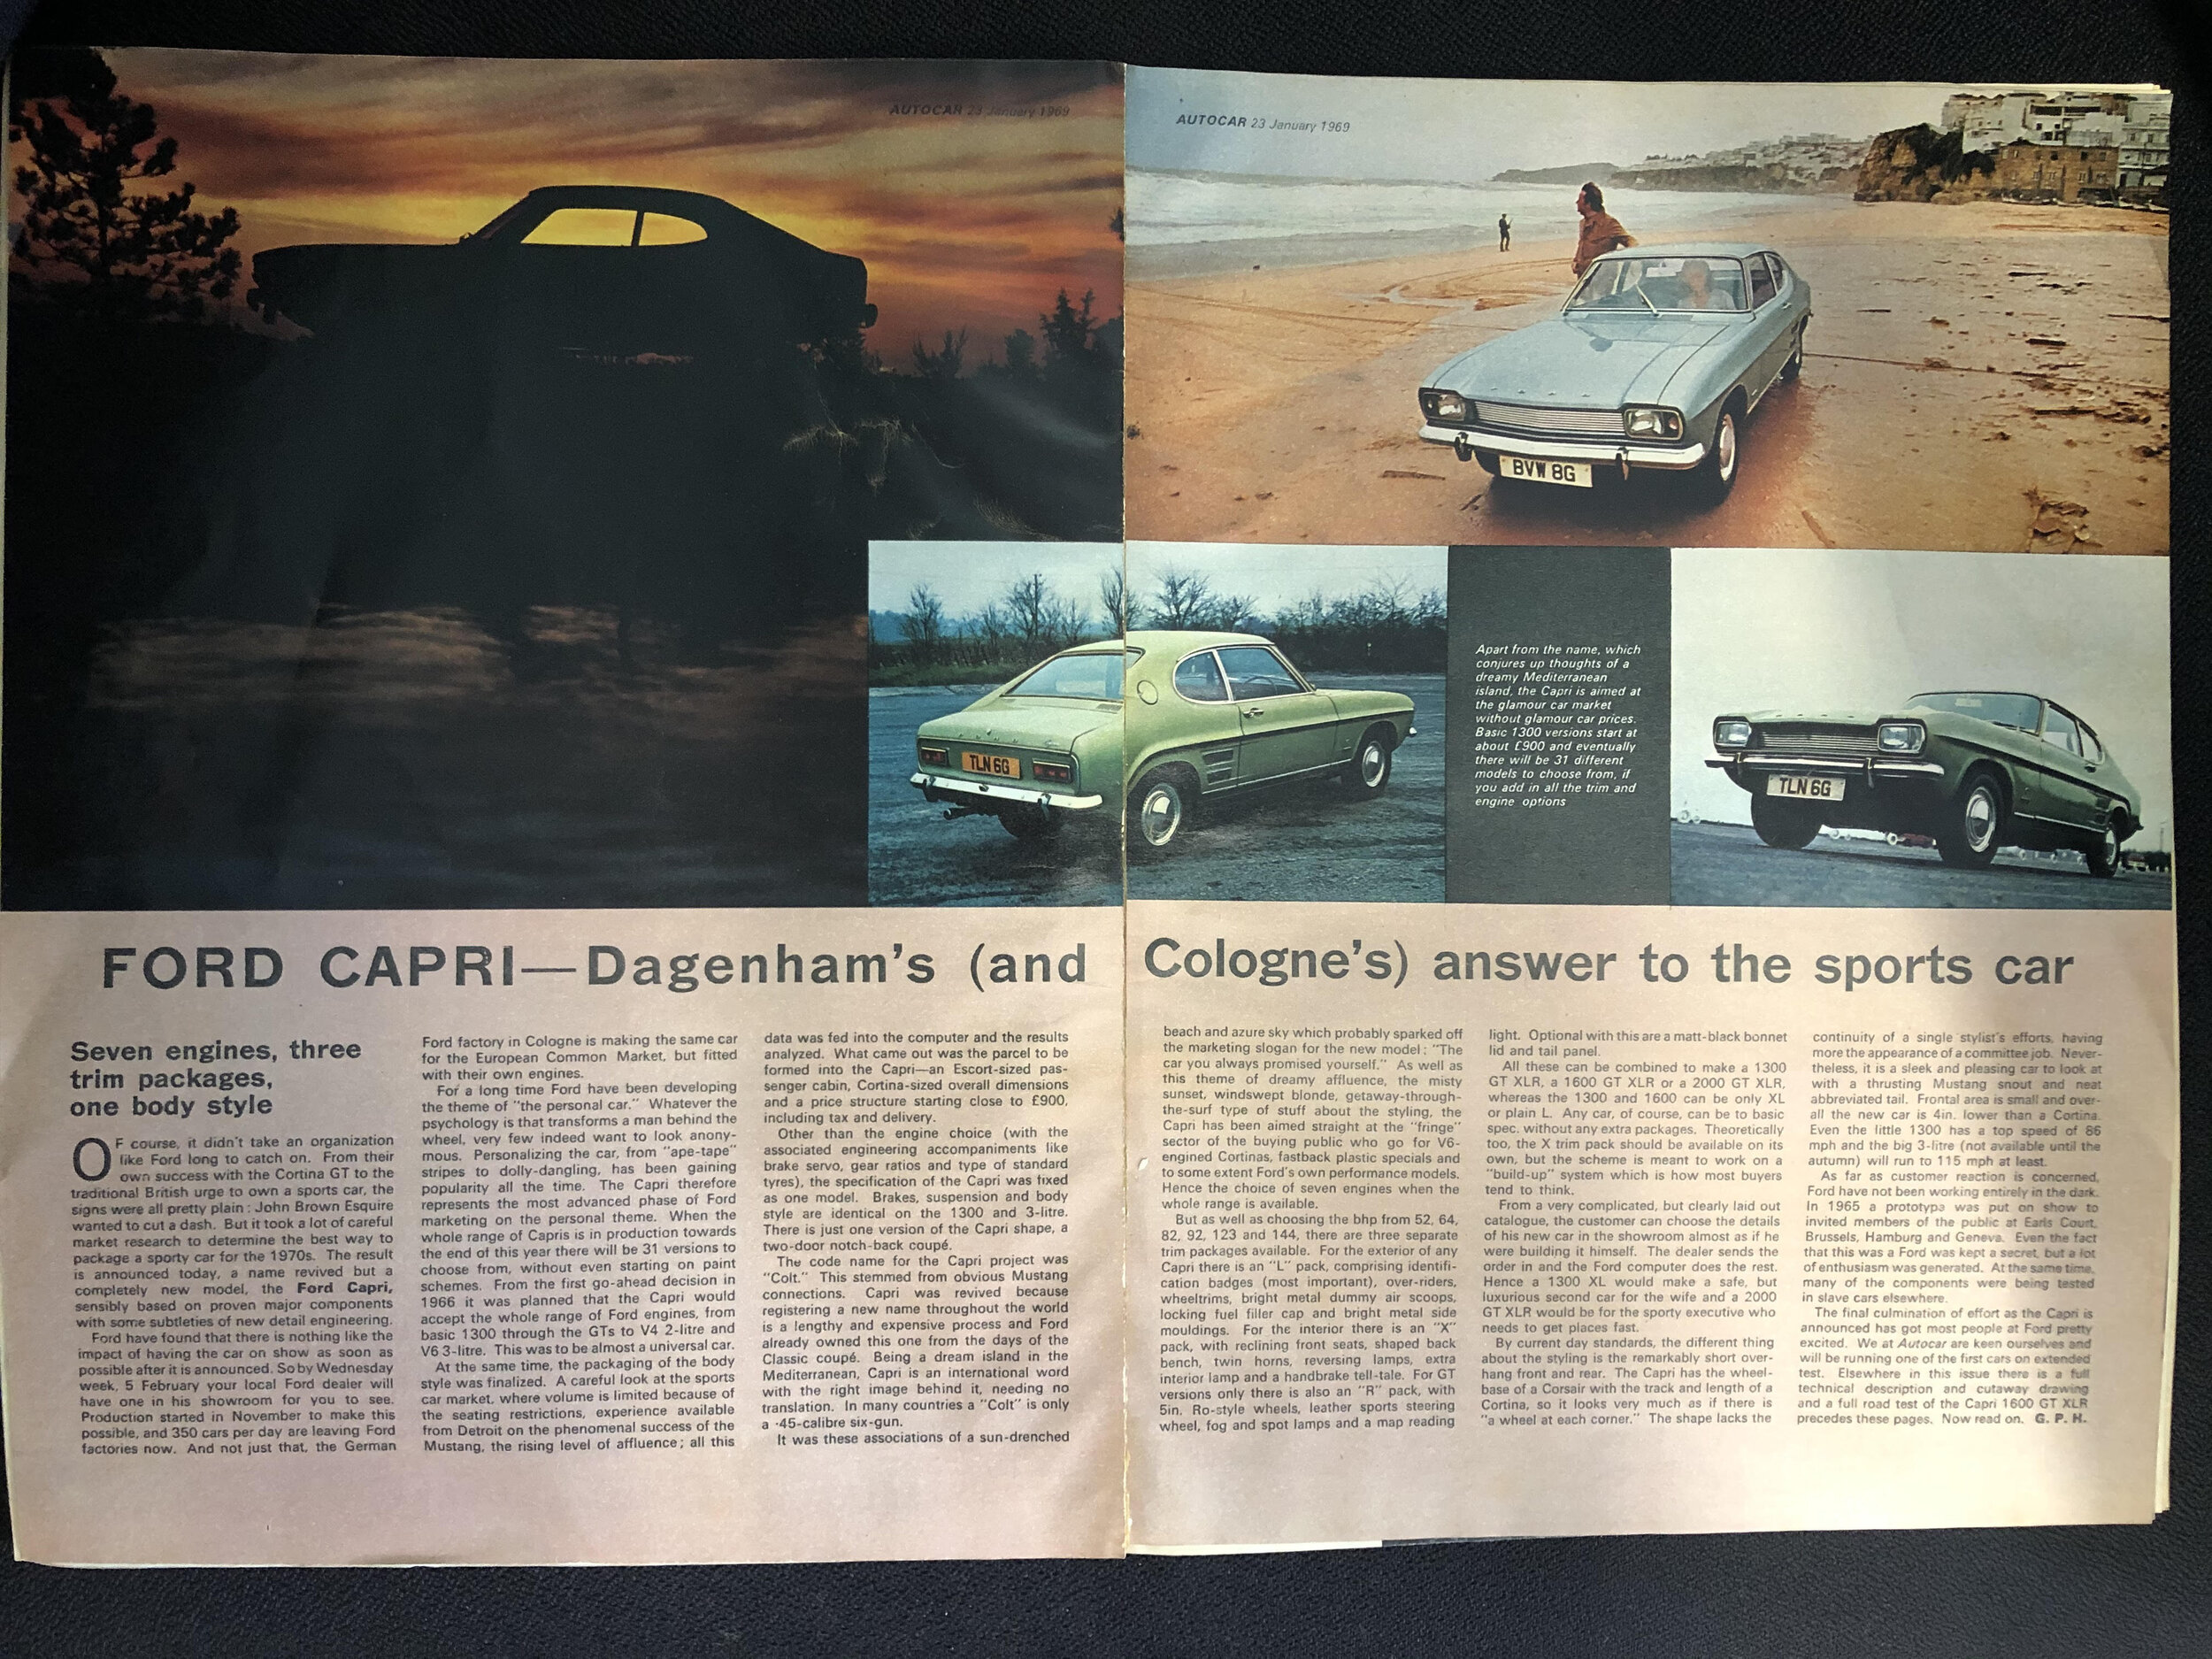 Looking back to 1969 - The Ford Capri launch in UK Autocar January 1969